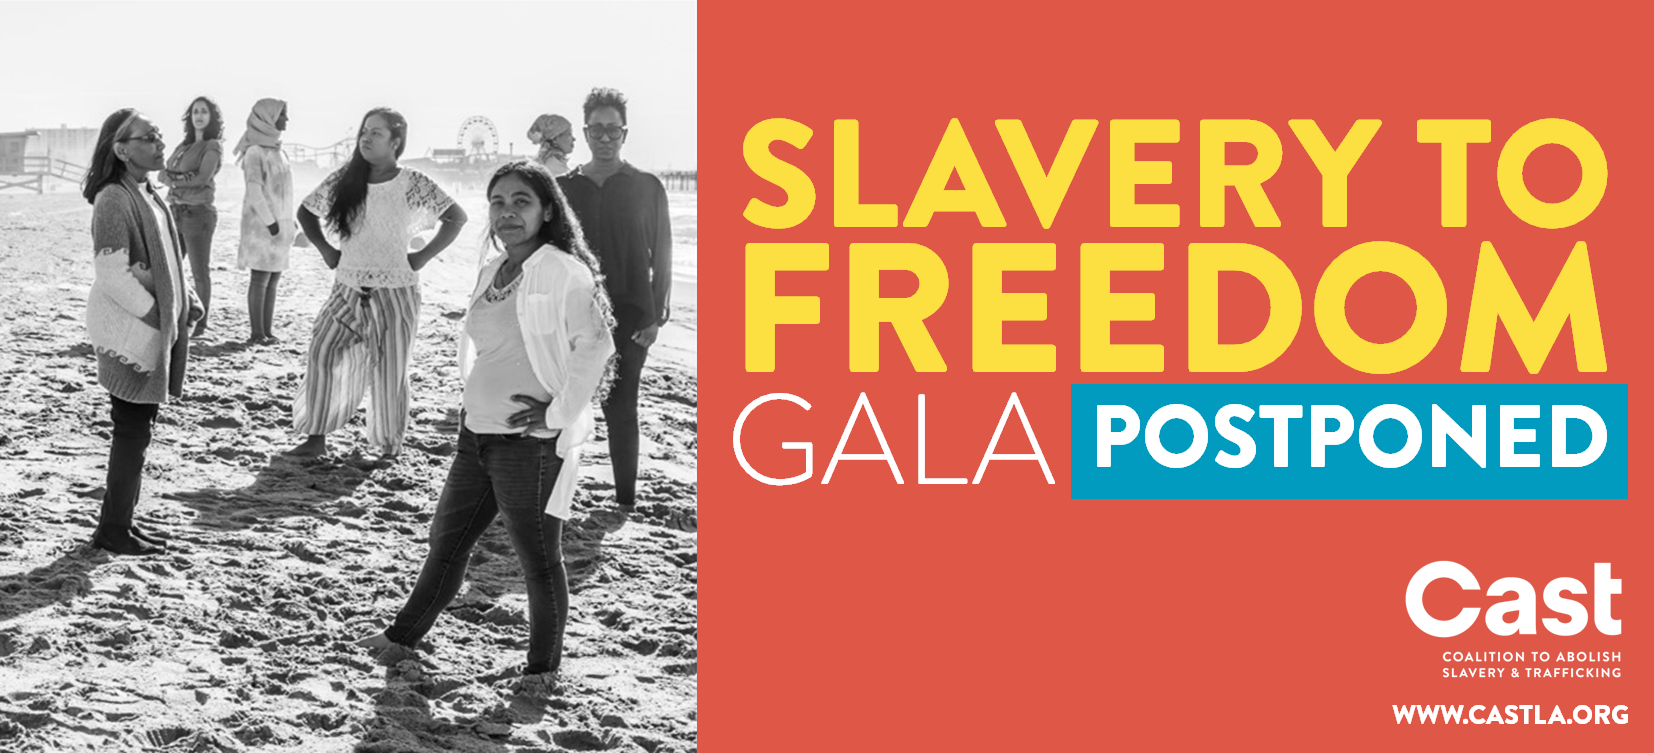 Cast La Coalition To Abolish Slavery And Human Trafficking Cast S Annual Freedom To Slavery